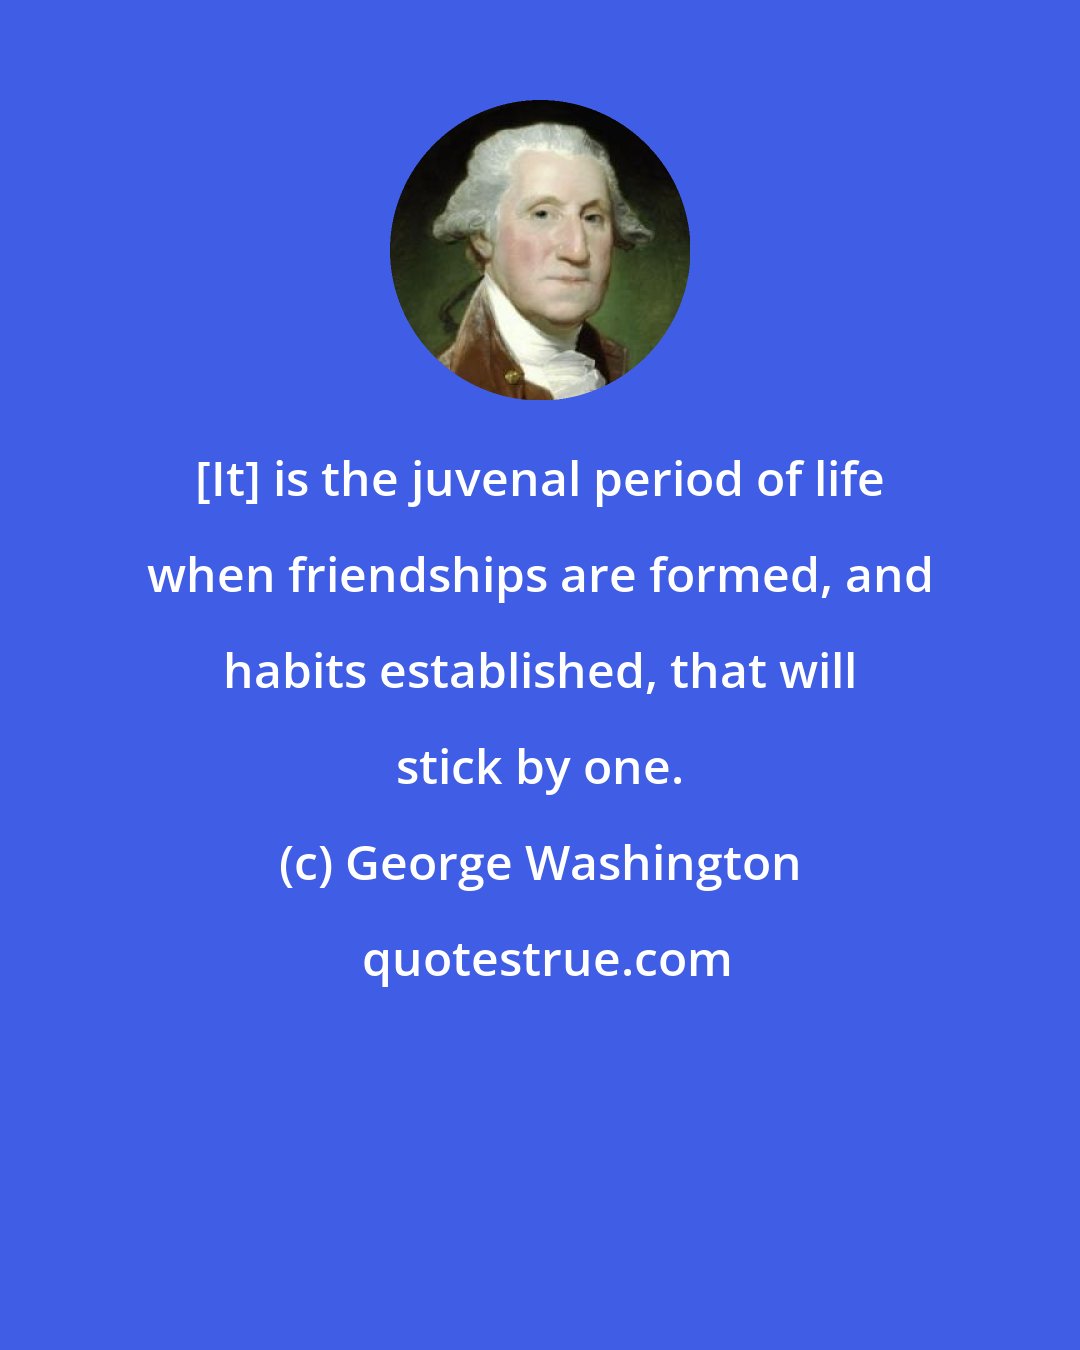 George Washington: [It] is the juvenal period of life when friendships are formed, and habits established, that will stick by one.